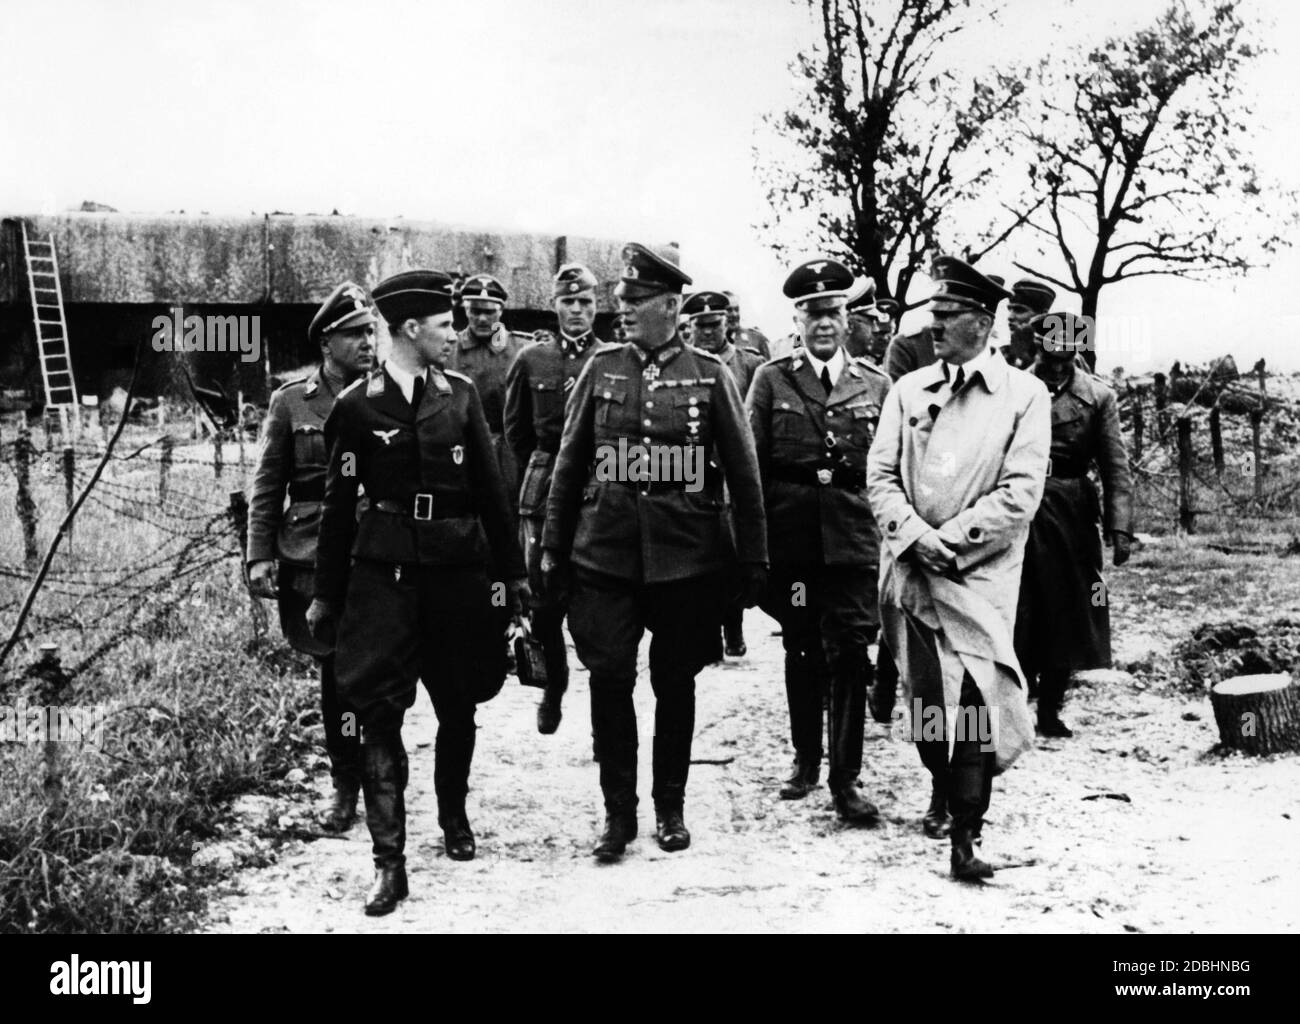 At the end of June 1940 Hitler visits the fortifications of the Maginot Line, accompanied by (from left to right): Martin Bormann, Field Marshal Keitel, State Secretary Lammers, Heinrich Himmler.  During the Western Campaign, which began on May 10, 1940, Colonel General Ritter von Leeb and Army Group C raided the Maginot Line in June 1940. After the capitulation of France, Leeb was promoted to the rank of Field Marshal on July 19, 1940. He had already been awarded the Knight's Cross of the Iron Cross on June 24, 1940. Stock Photo